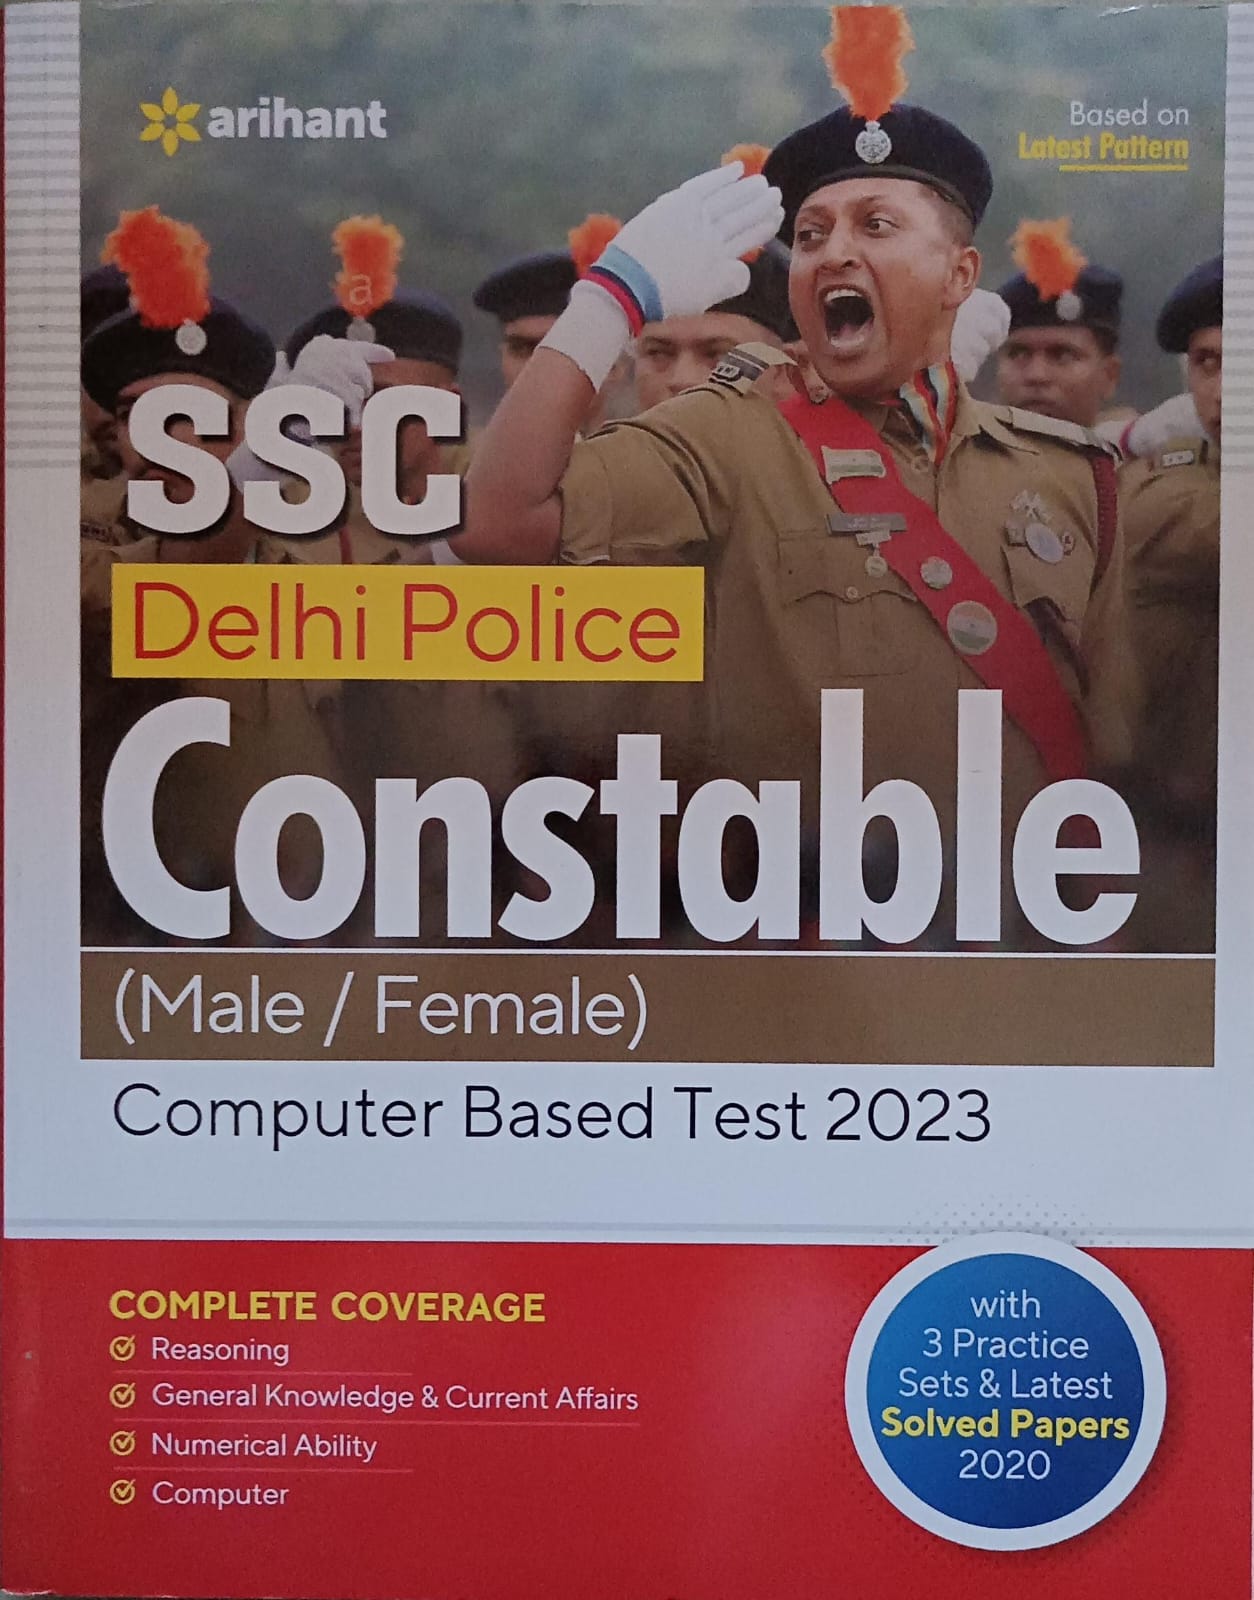 Arihant SSC Delhi Police Constable (Male/Female) Computer Based Test 2023